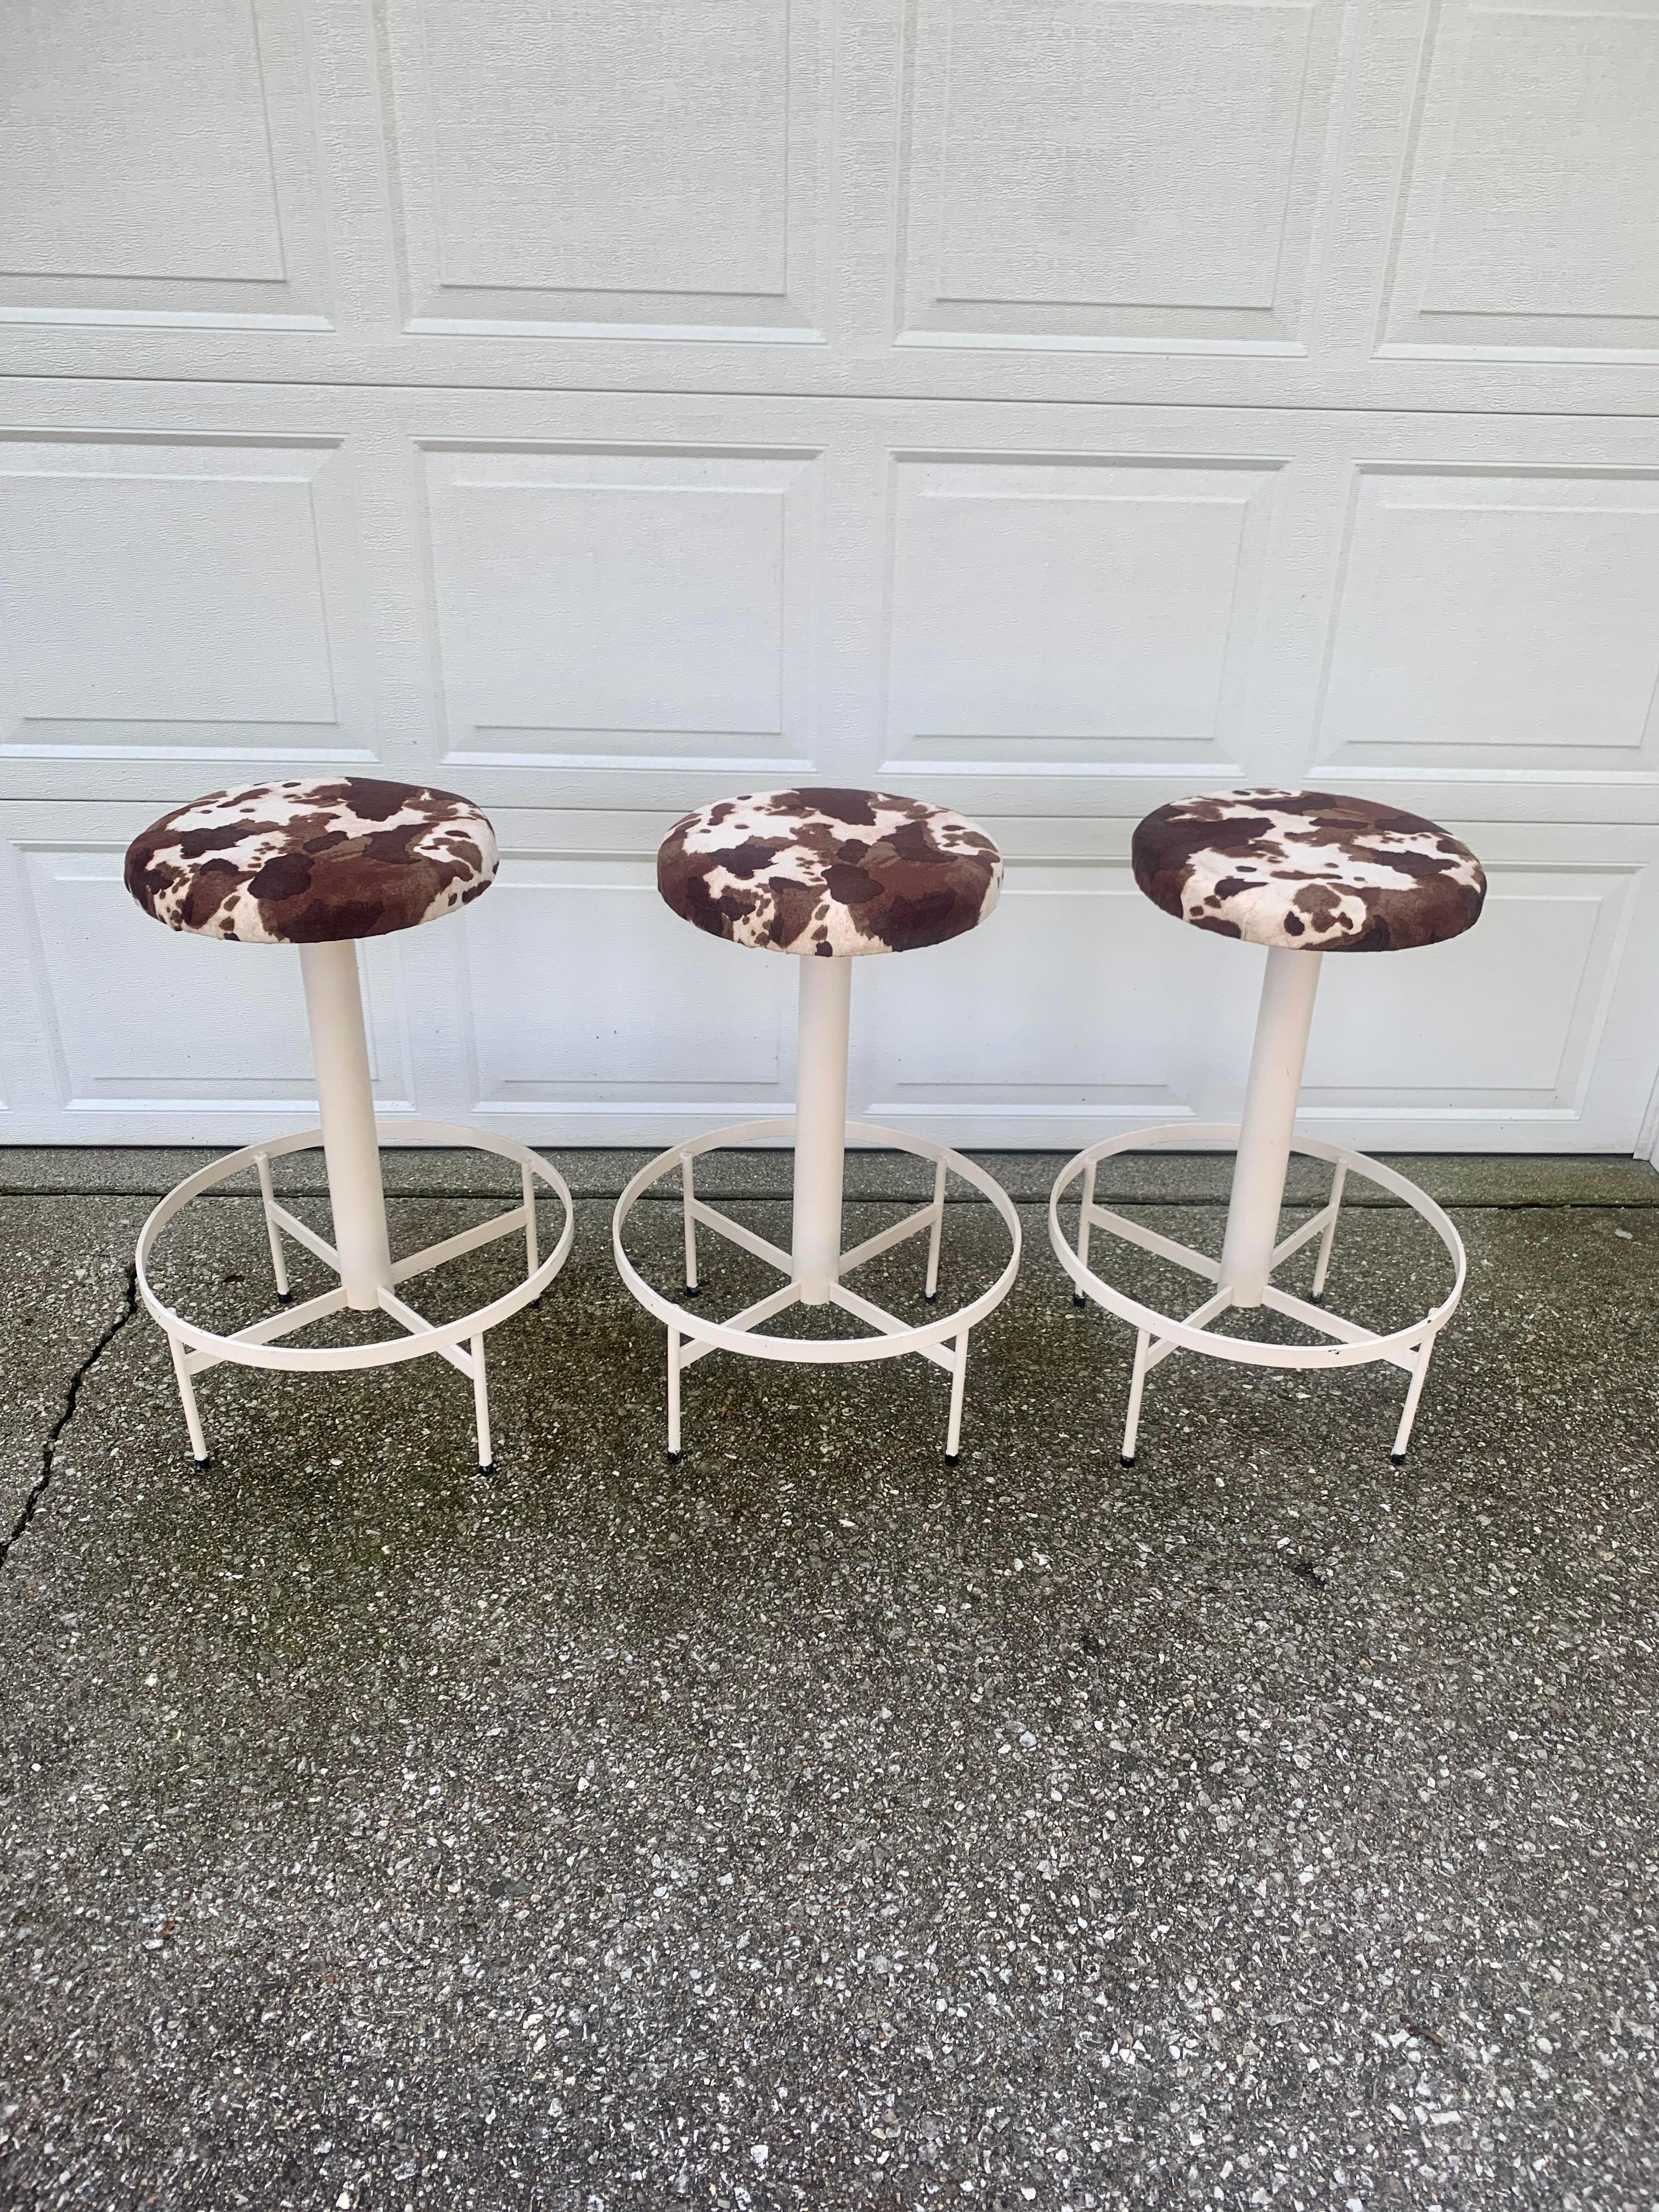 A cool set of three mid-century industrial bar stools

USA, Circa mid-20th century

Painted metal base, with cow hide patterned upholstered seats.

Measures: 19